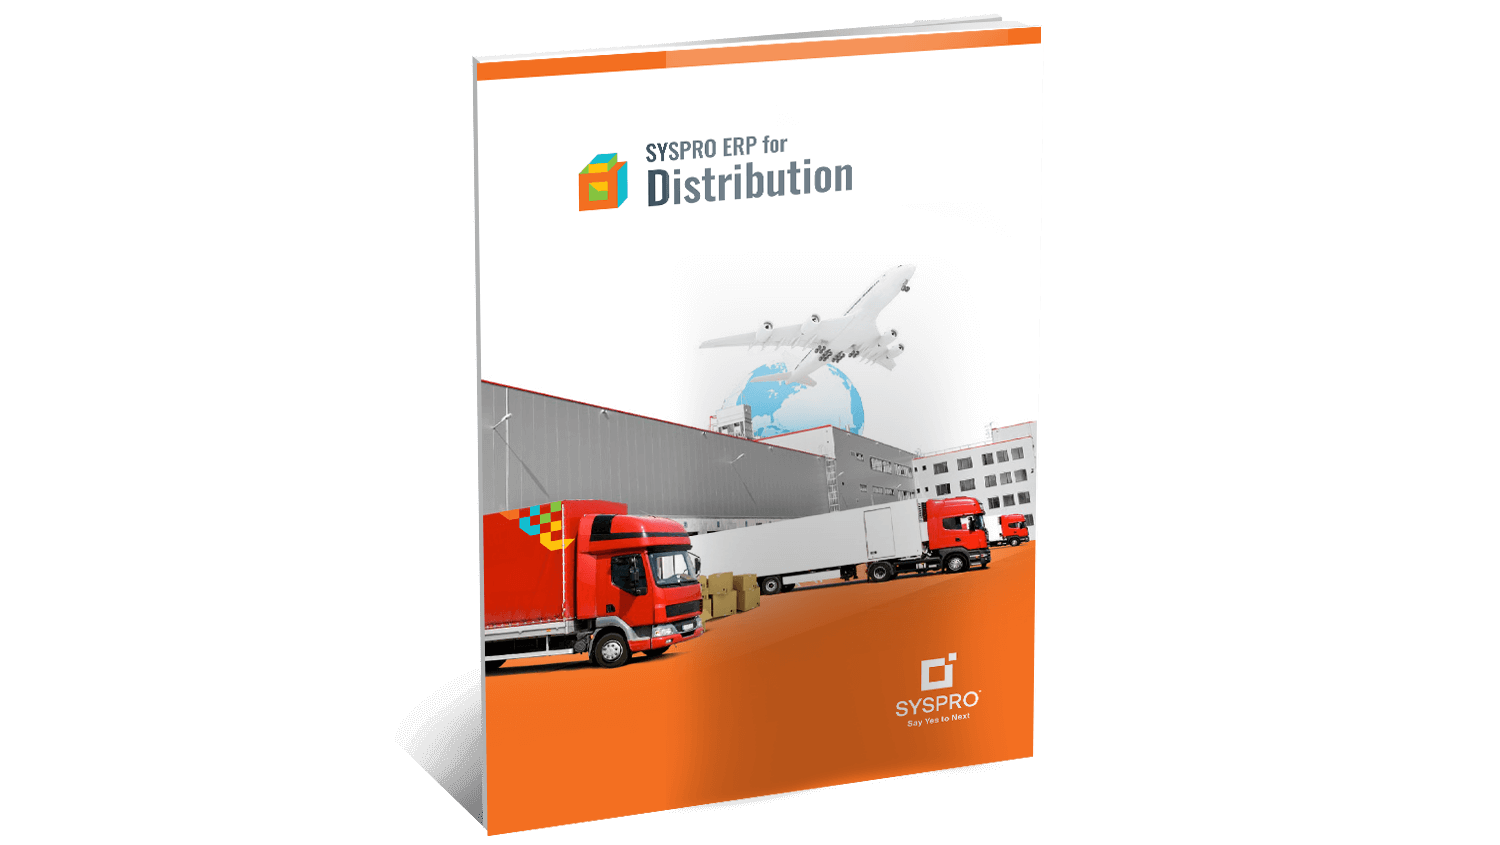 SYSPRO-ERP-software-system-Syspro-distribution-dall-brochure